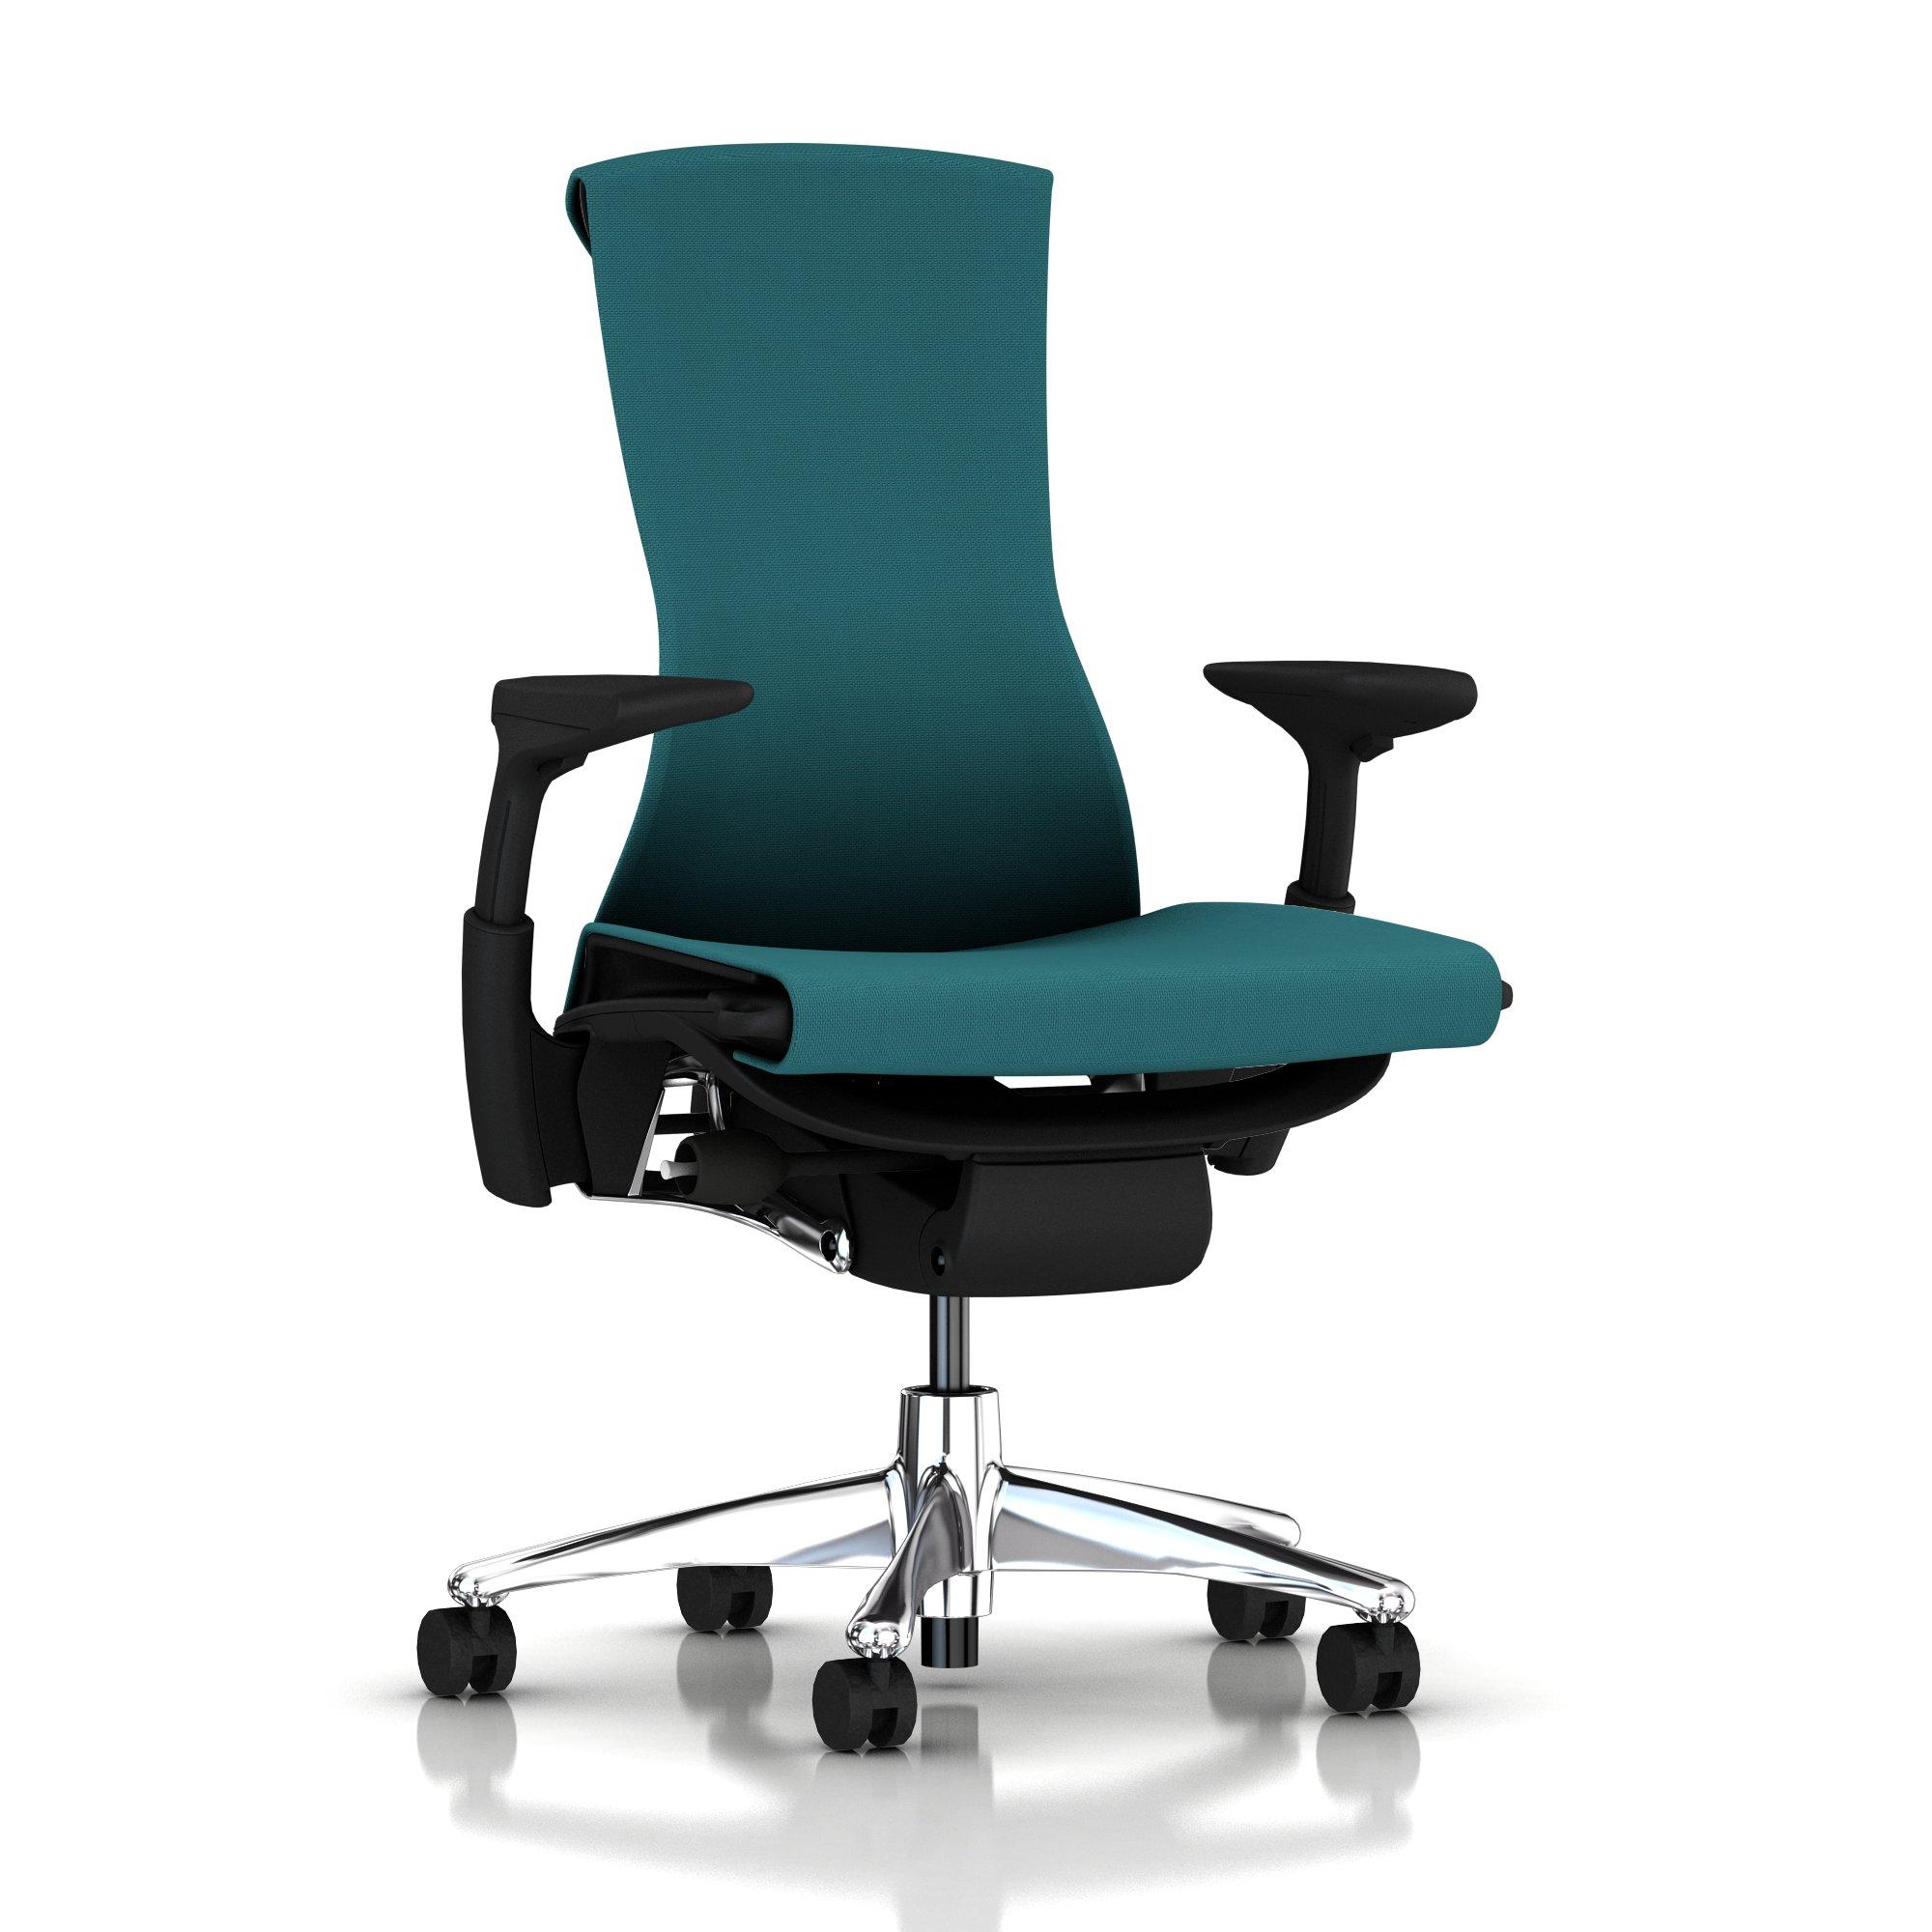 Embody Chair Peacock Rhythm with Graphite Frame Aluminum Base by Herman Miller